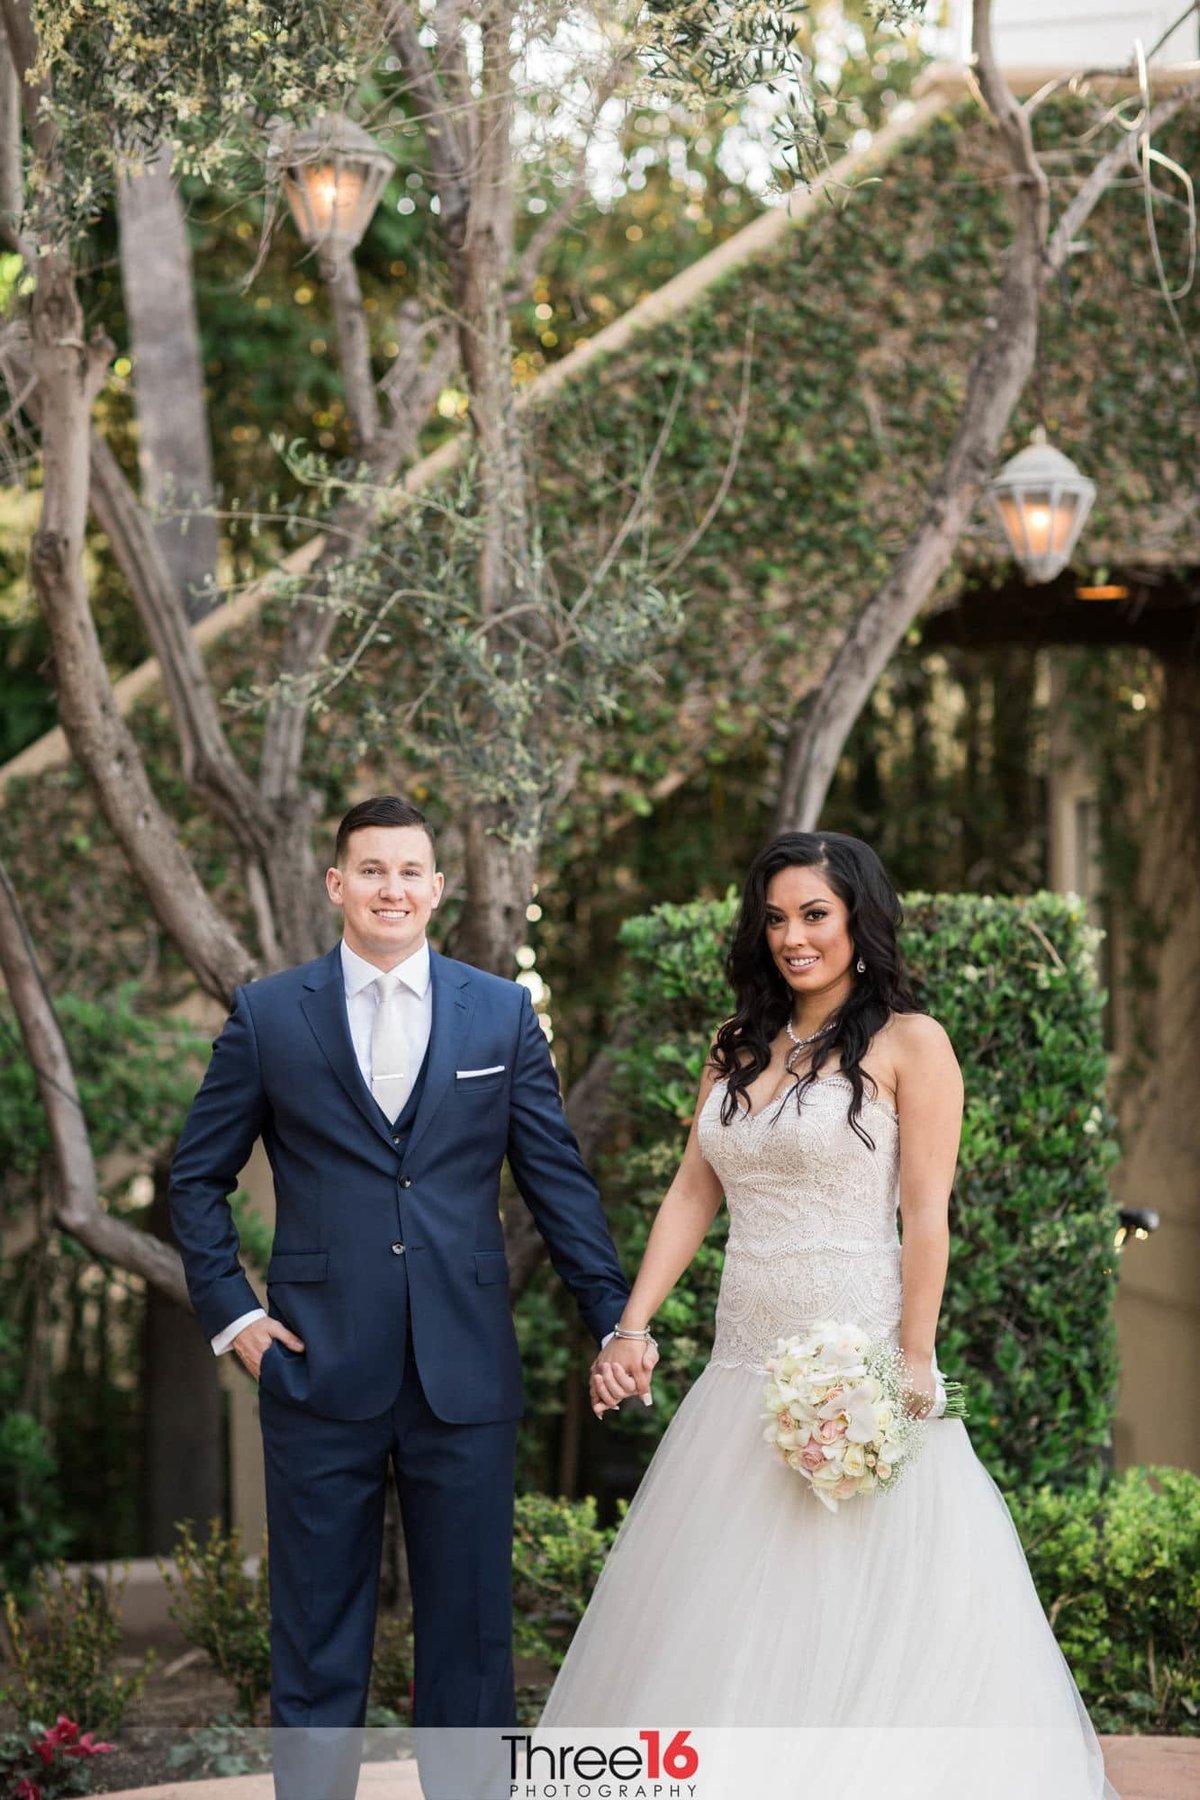 Bride and Groom are all smiles as they hold hands and pose for the wedding phtographer